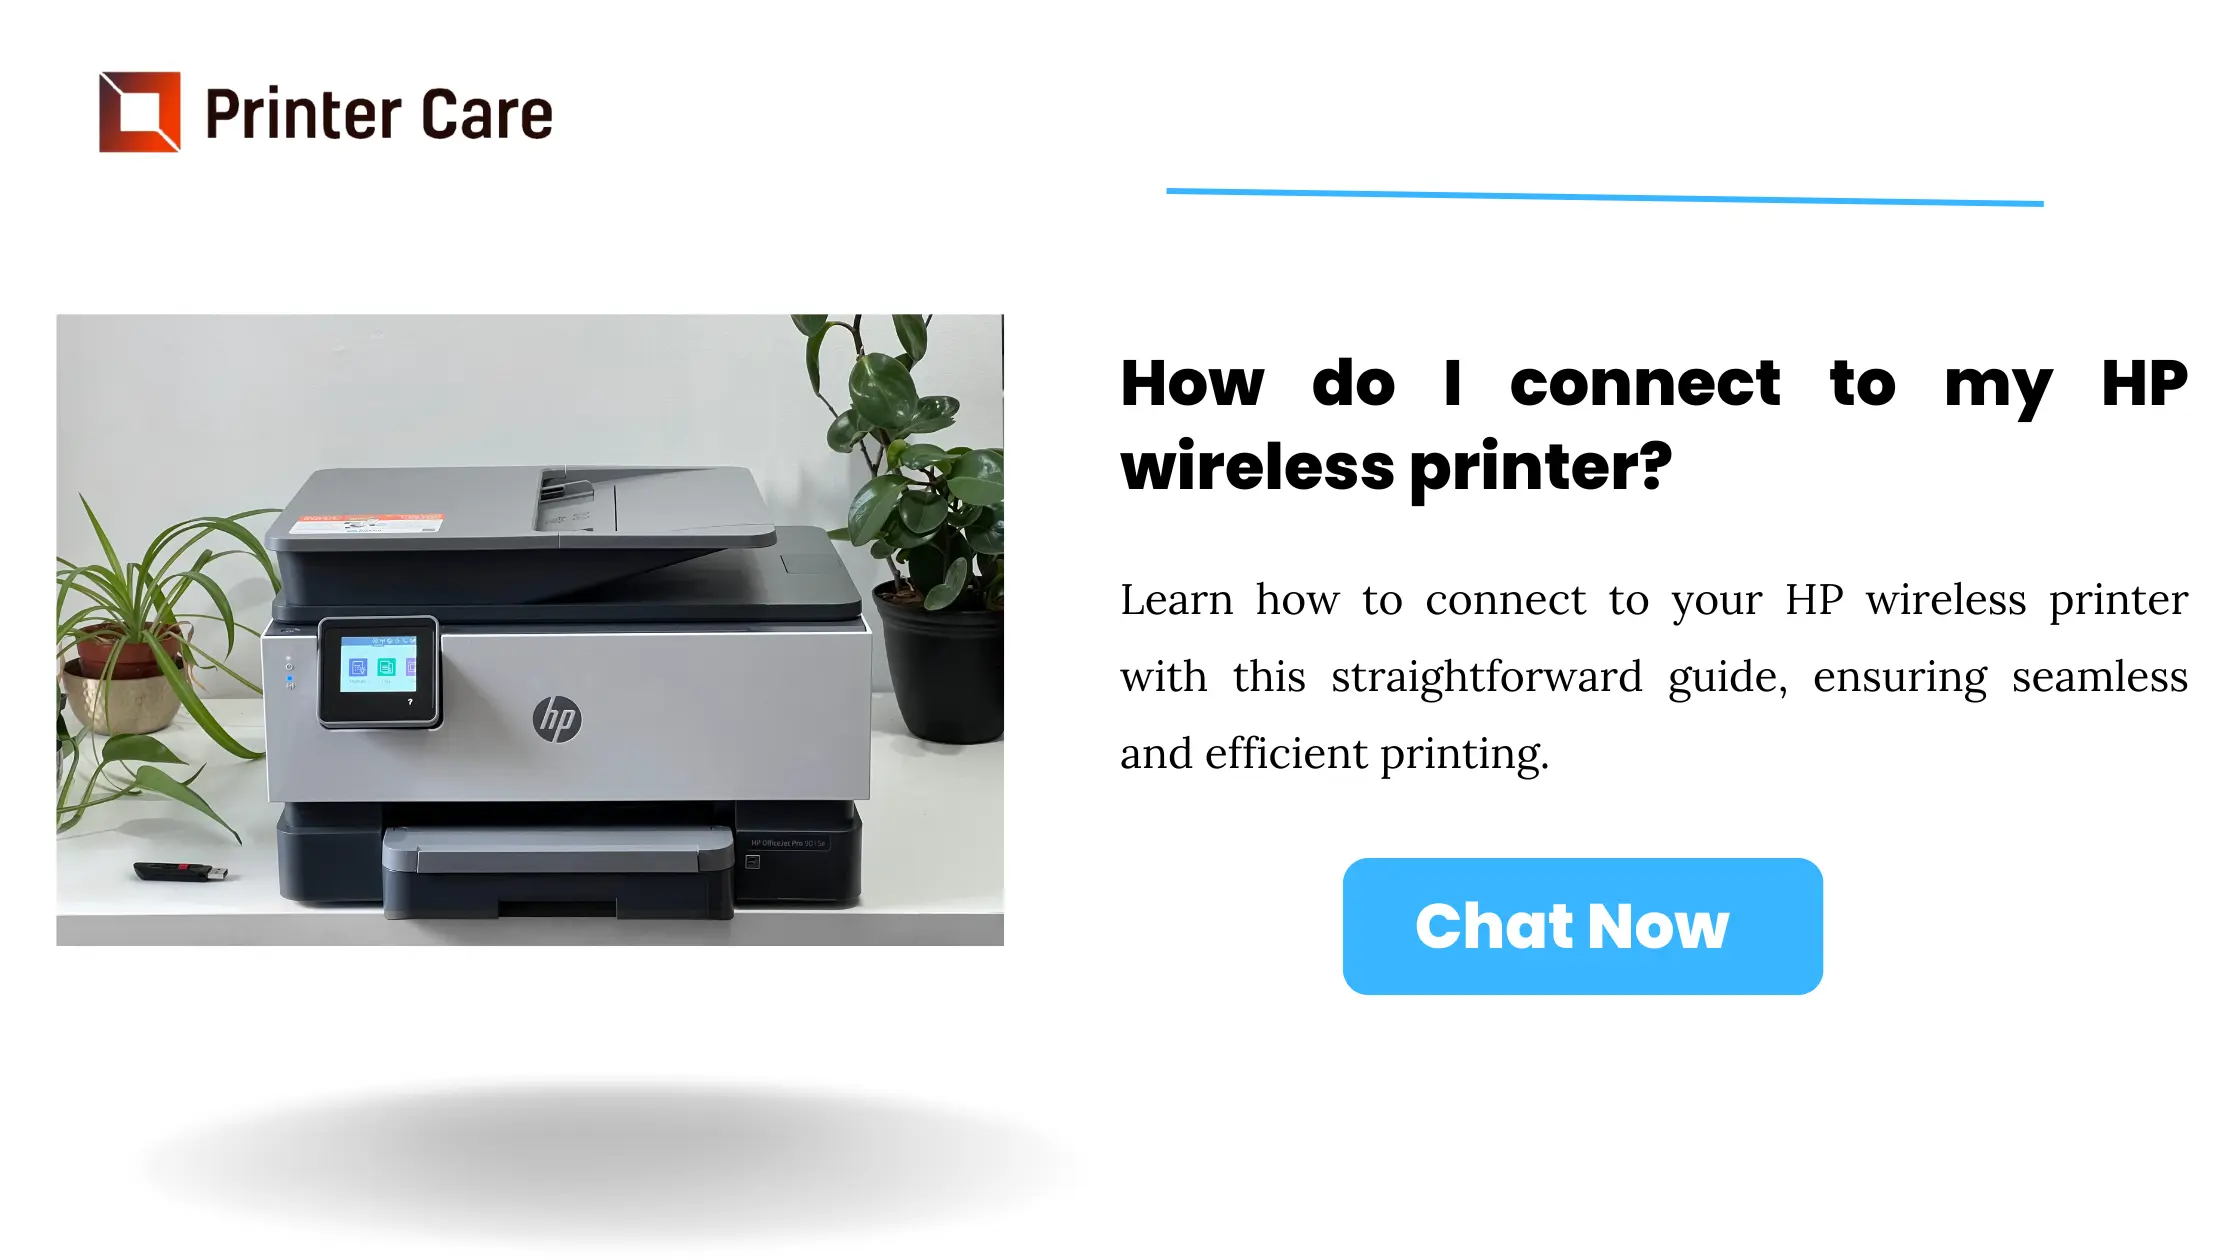 How do I connect to my HP wireless printer?